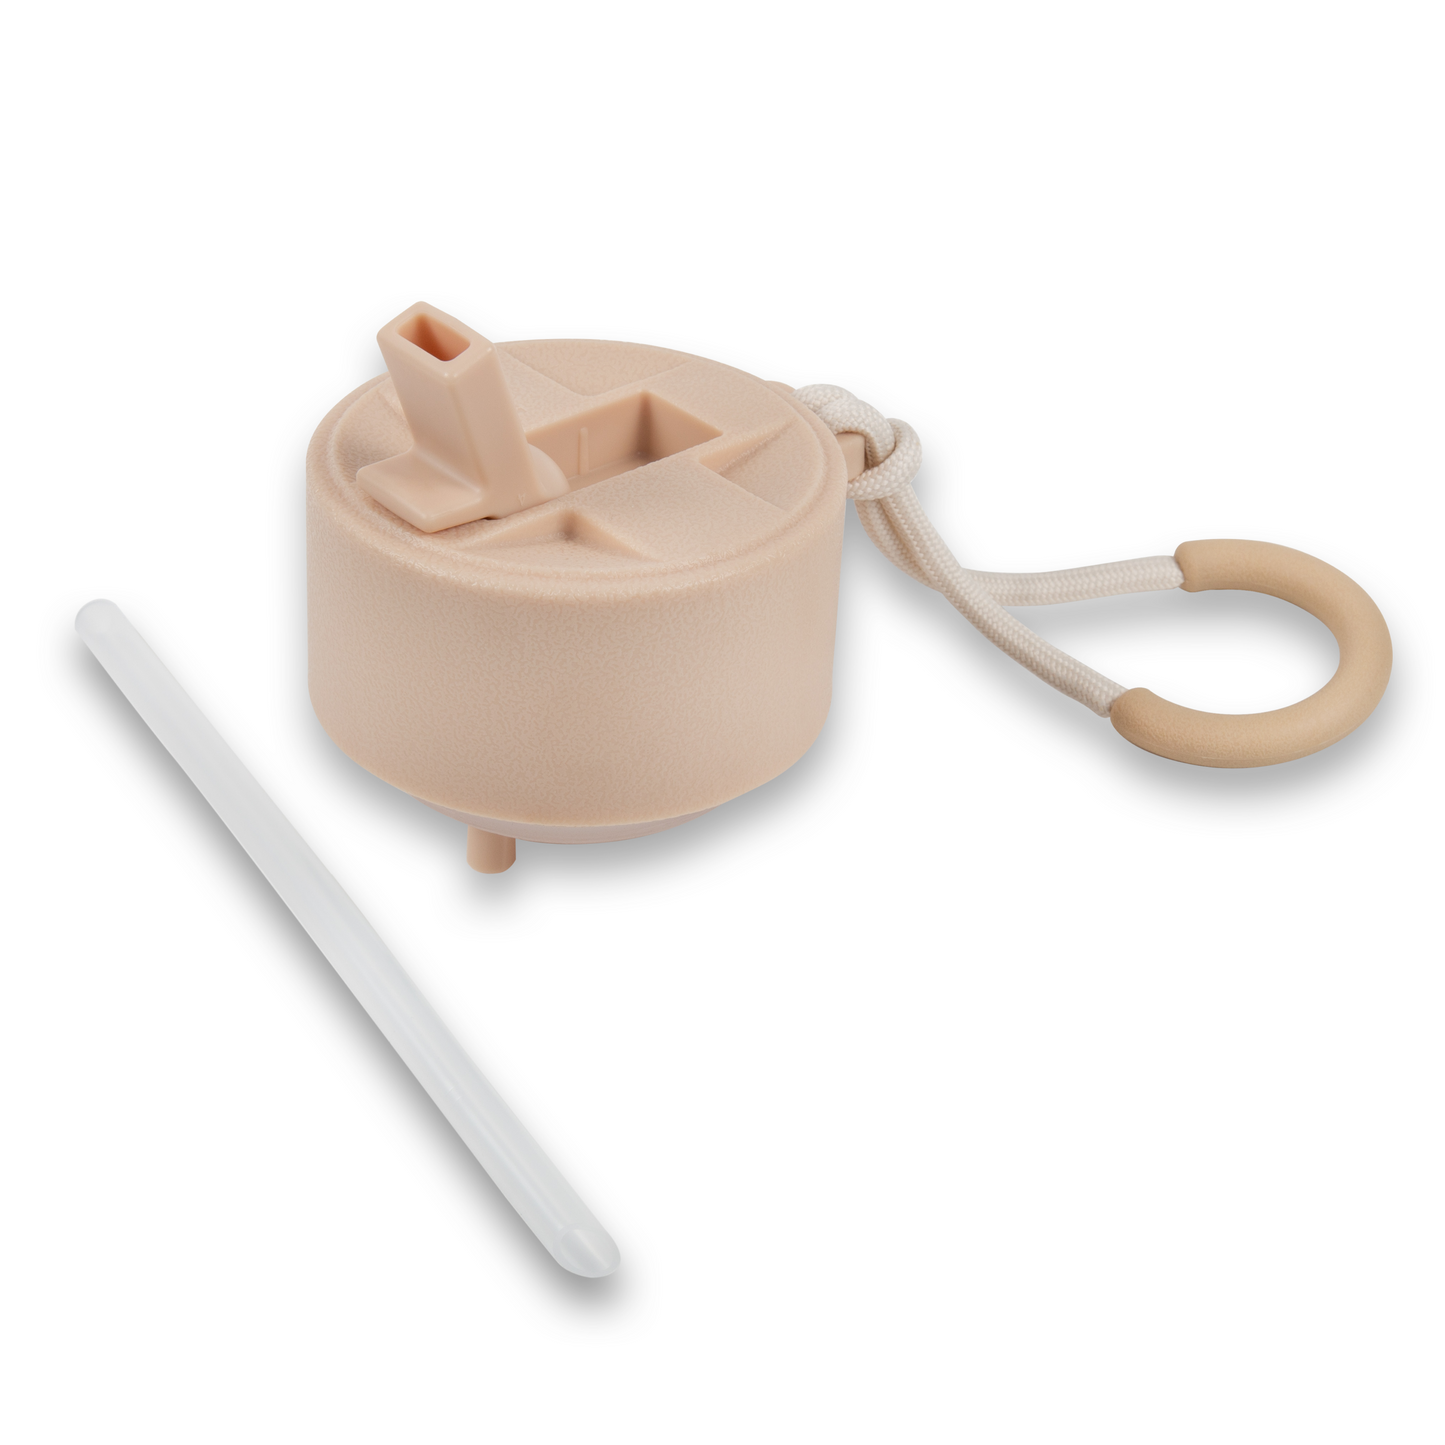 Suplmnt's Champagne Colored straw lid with a matching handle